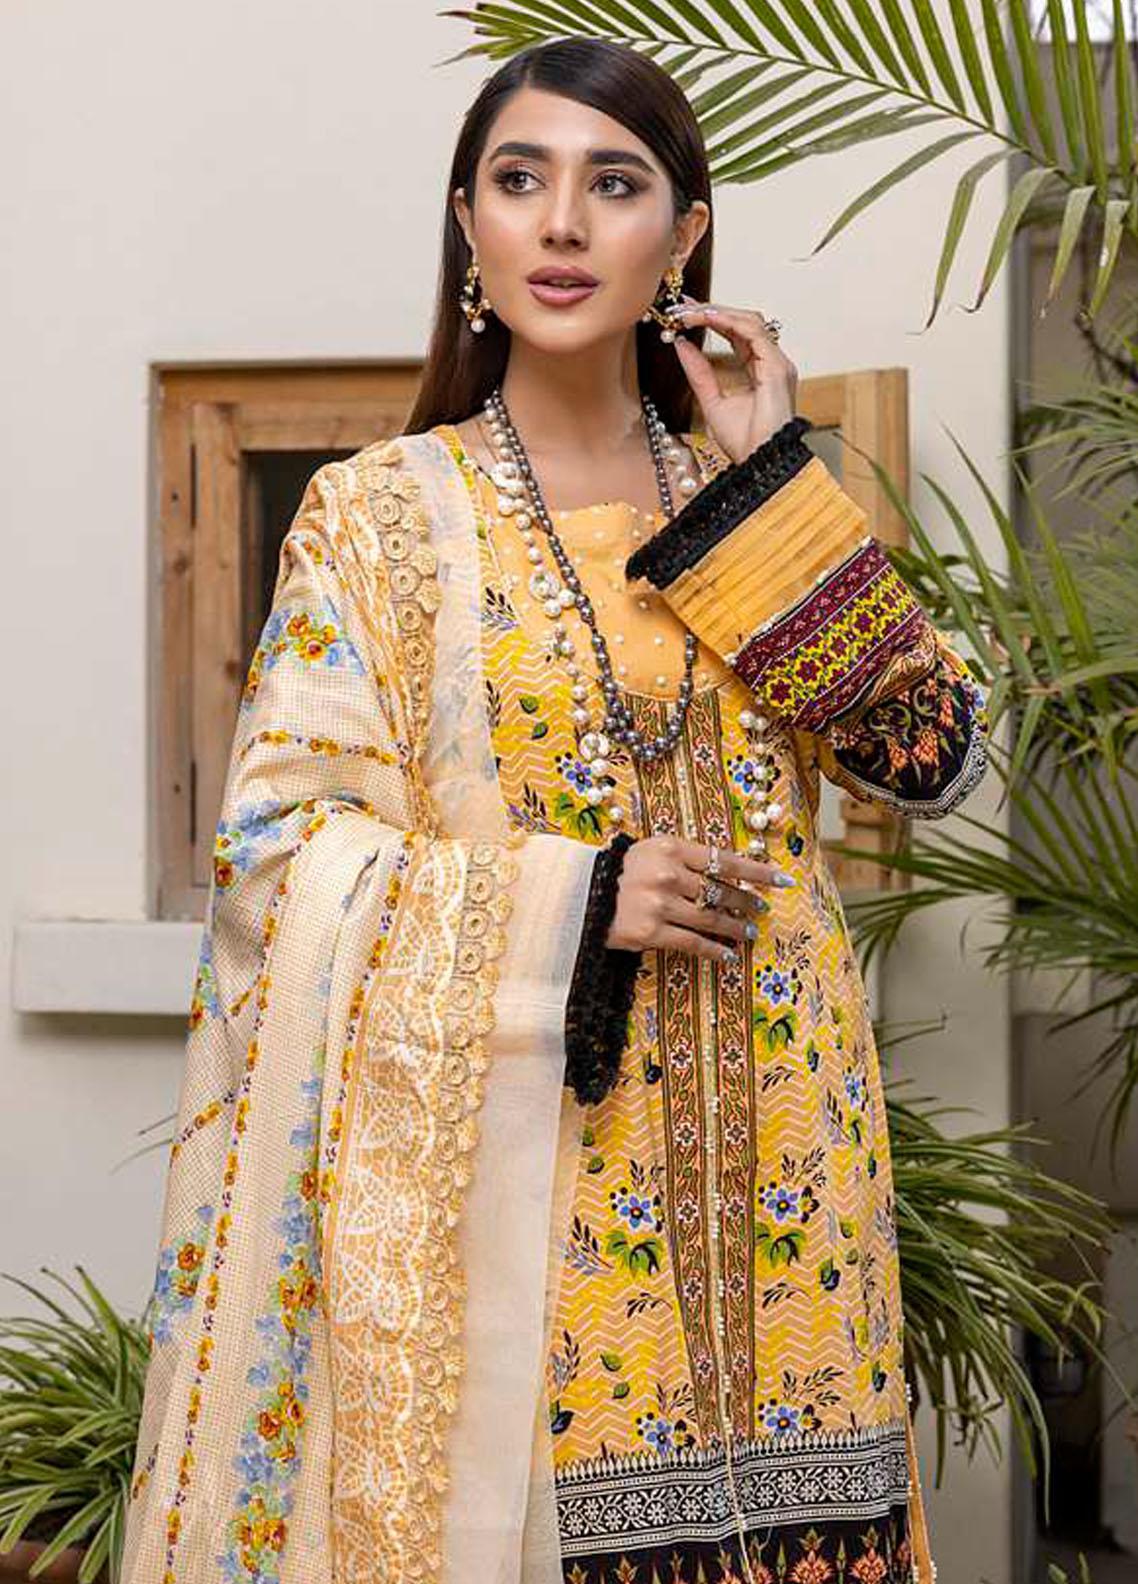 Monsoon Bahar By Al Zohaib Printed Lawn Suits Unstitched 3 Piece - 1A - Summer Collection